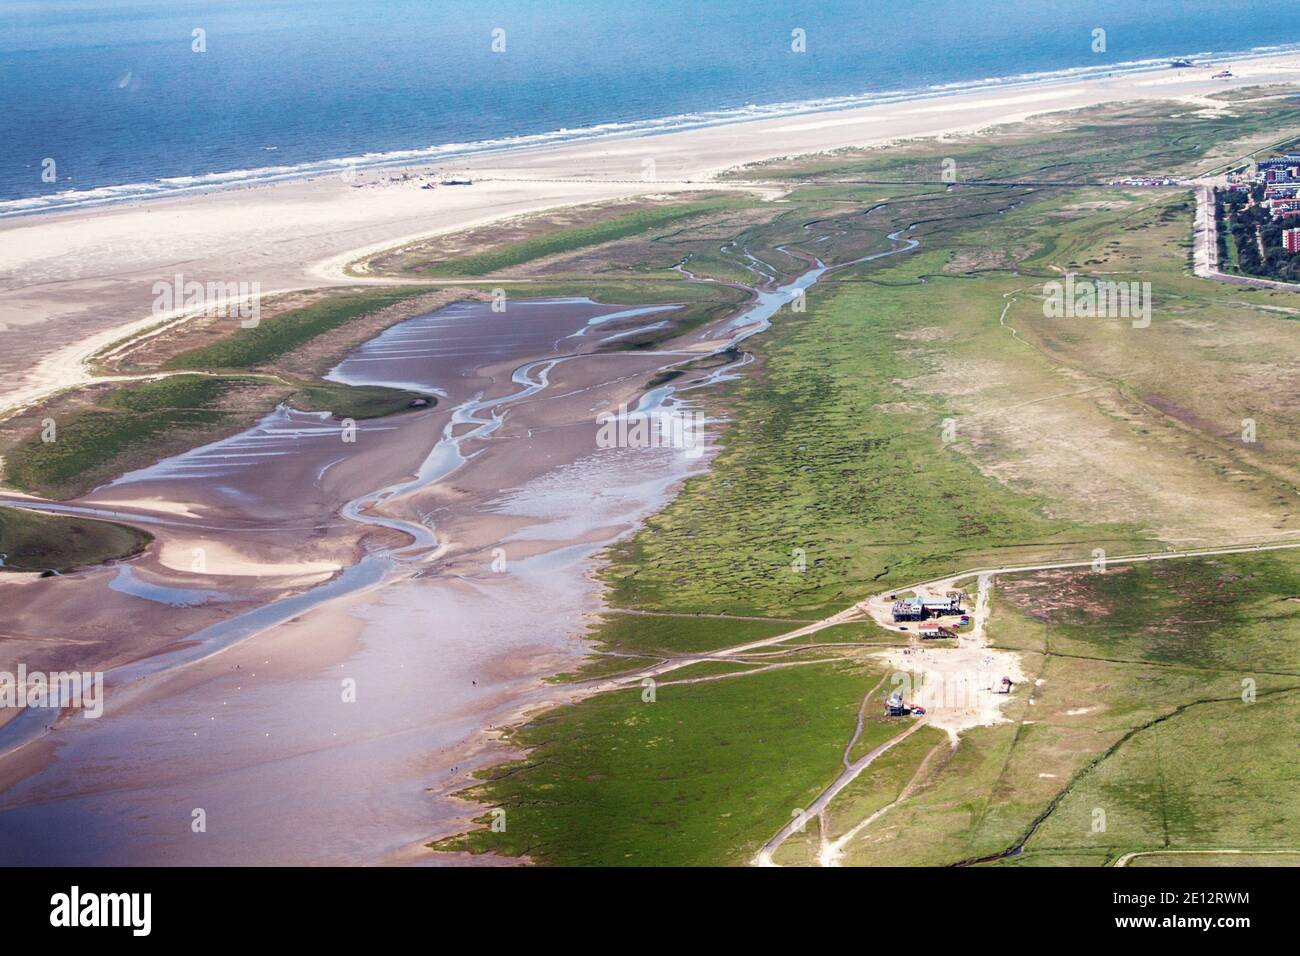 St. Peter-Ording, Aerial Photo Of The Schleswig-Holstein Wadden Sea National Park In Germany Stock Photo